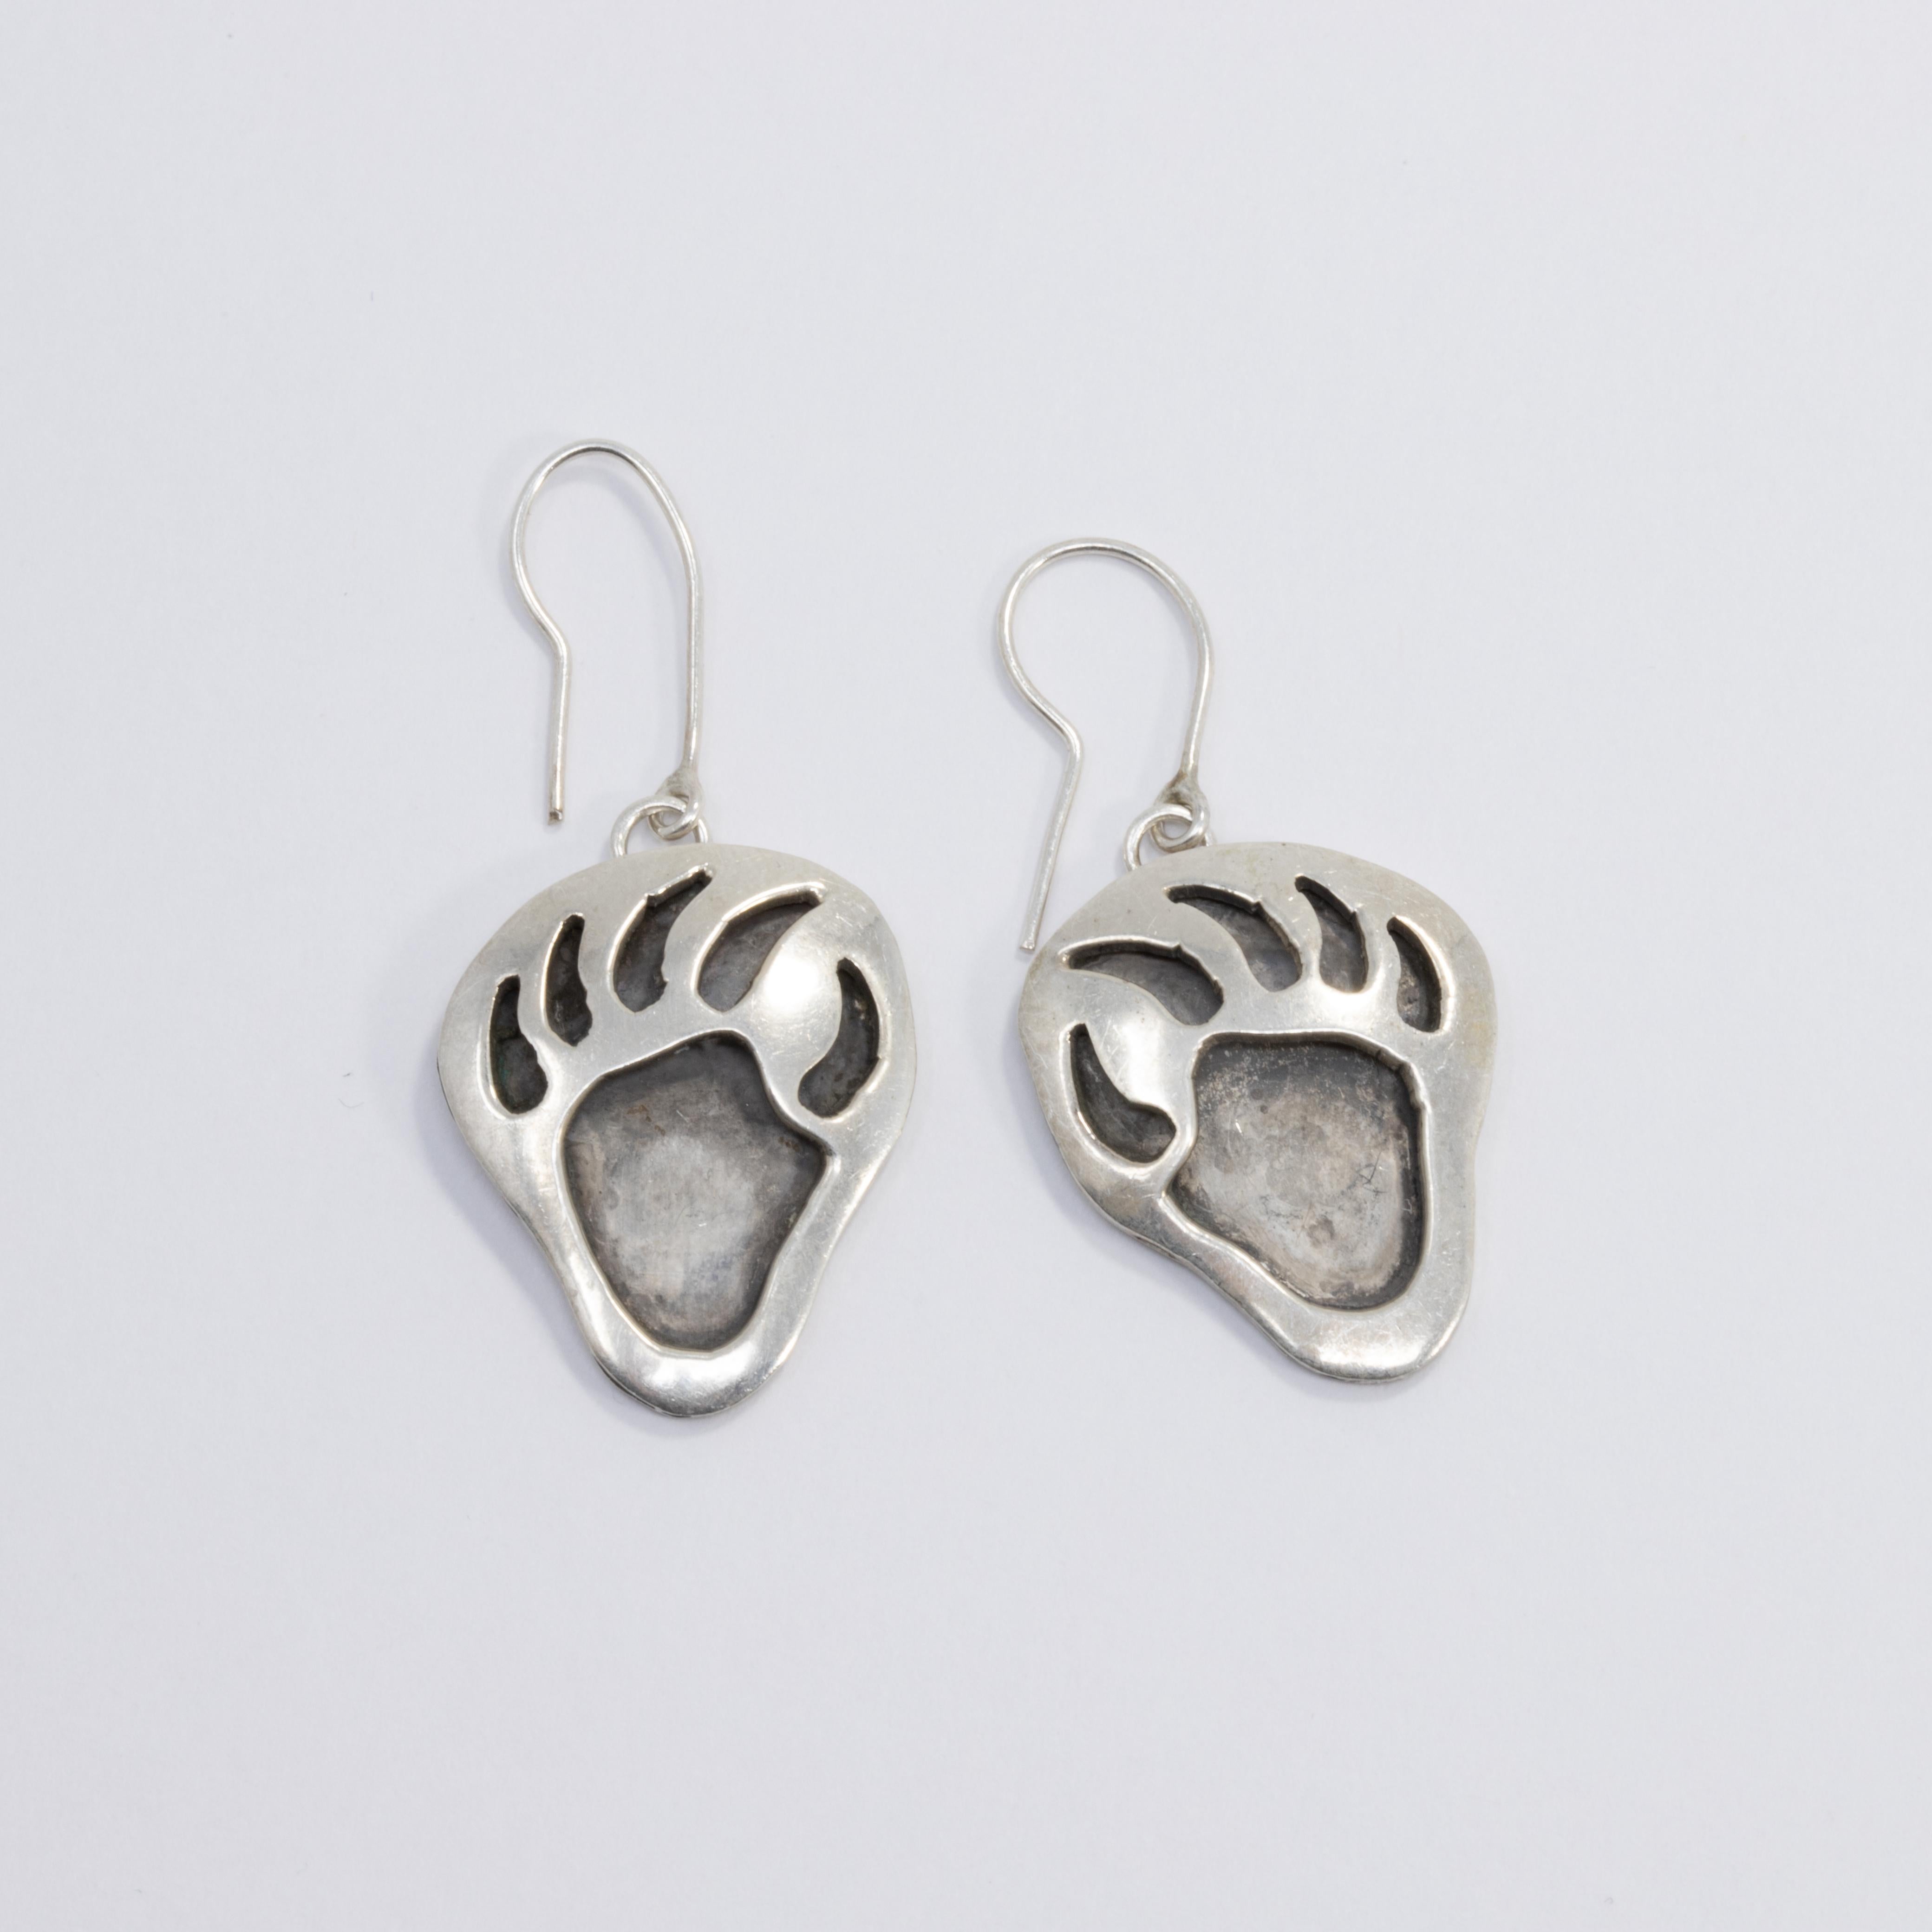 A pair of Native American bear claw earrings, each featuring a bear claw motif, handcrafted by Indian silversmiths. 

Hallmarks: Sterling